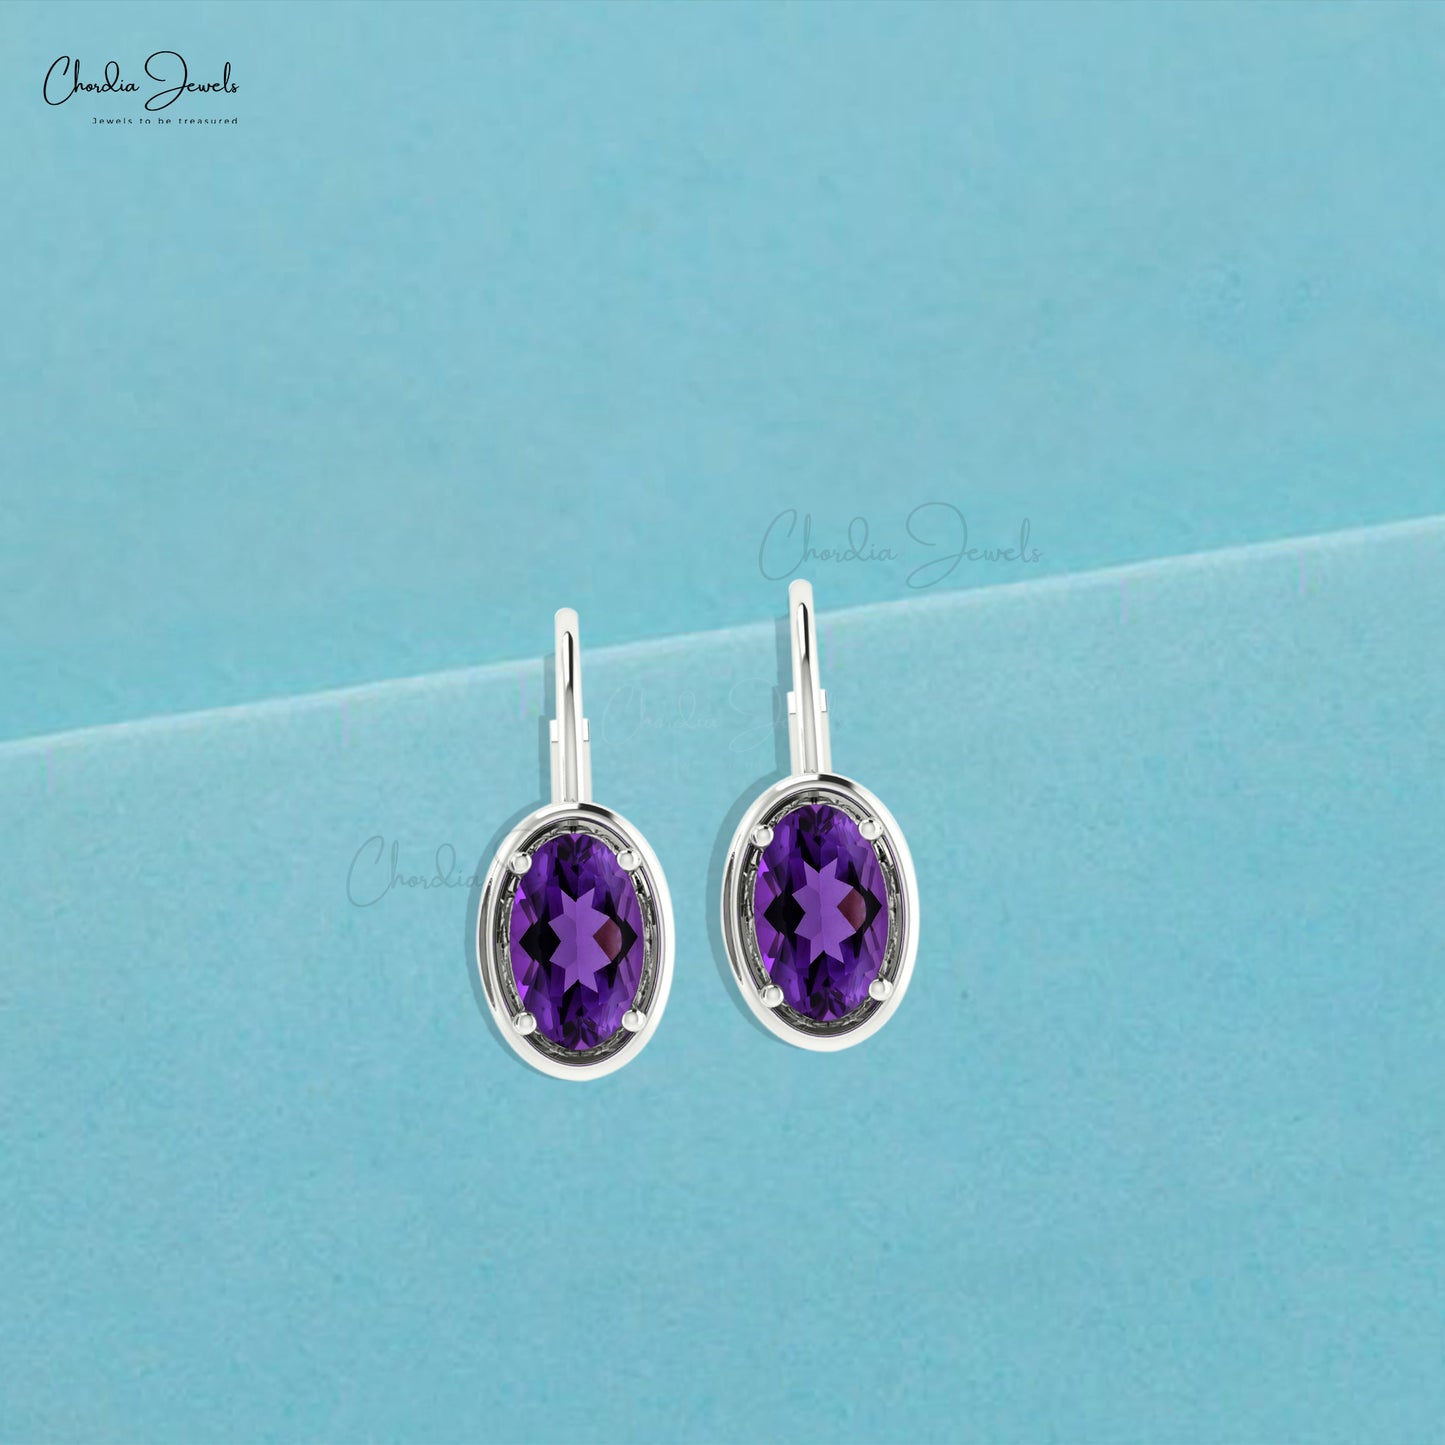 Load image into Gallery viewer, Amethyst Dangle 7x5mm Oval Faceted Lever Back Hoop Earrings for Her in 14k White Gold
